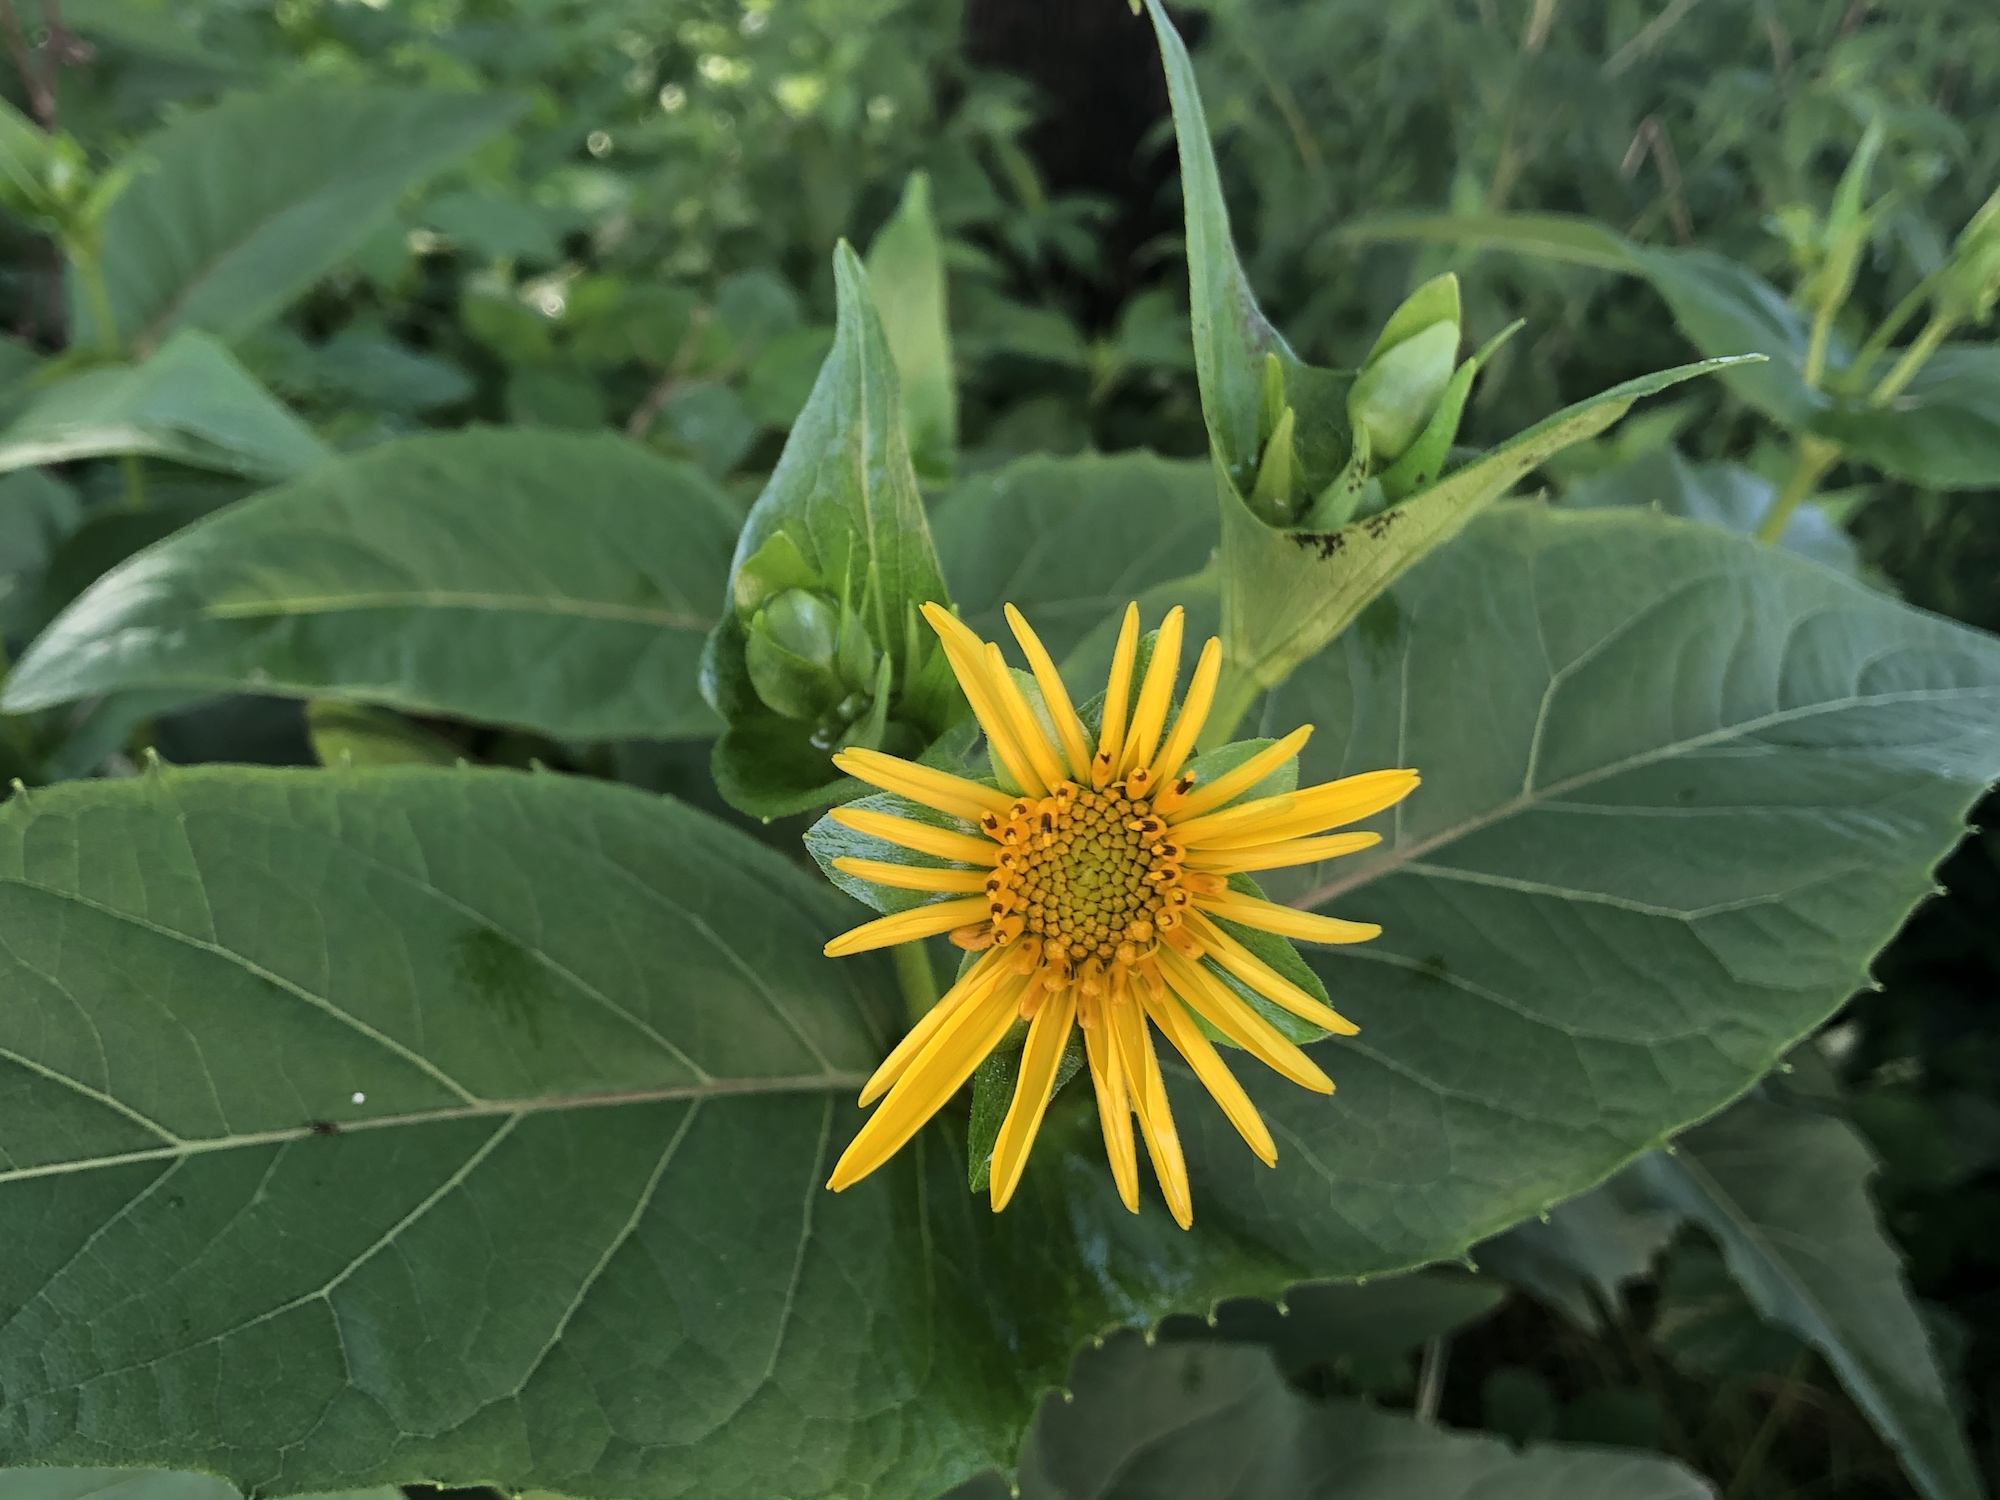 Cup Plant at edge of woods between Marion Dunn and Oak Savanna in Madison, Wisconsin on July 4, 2019.